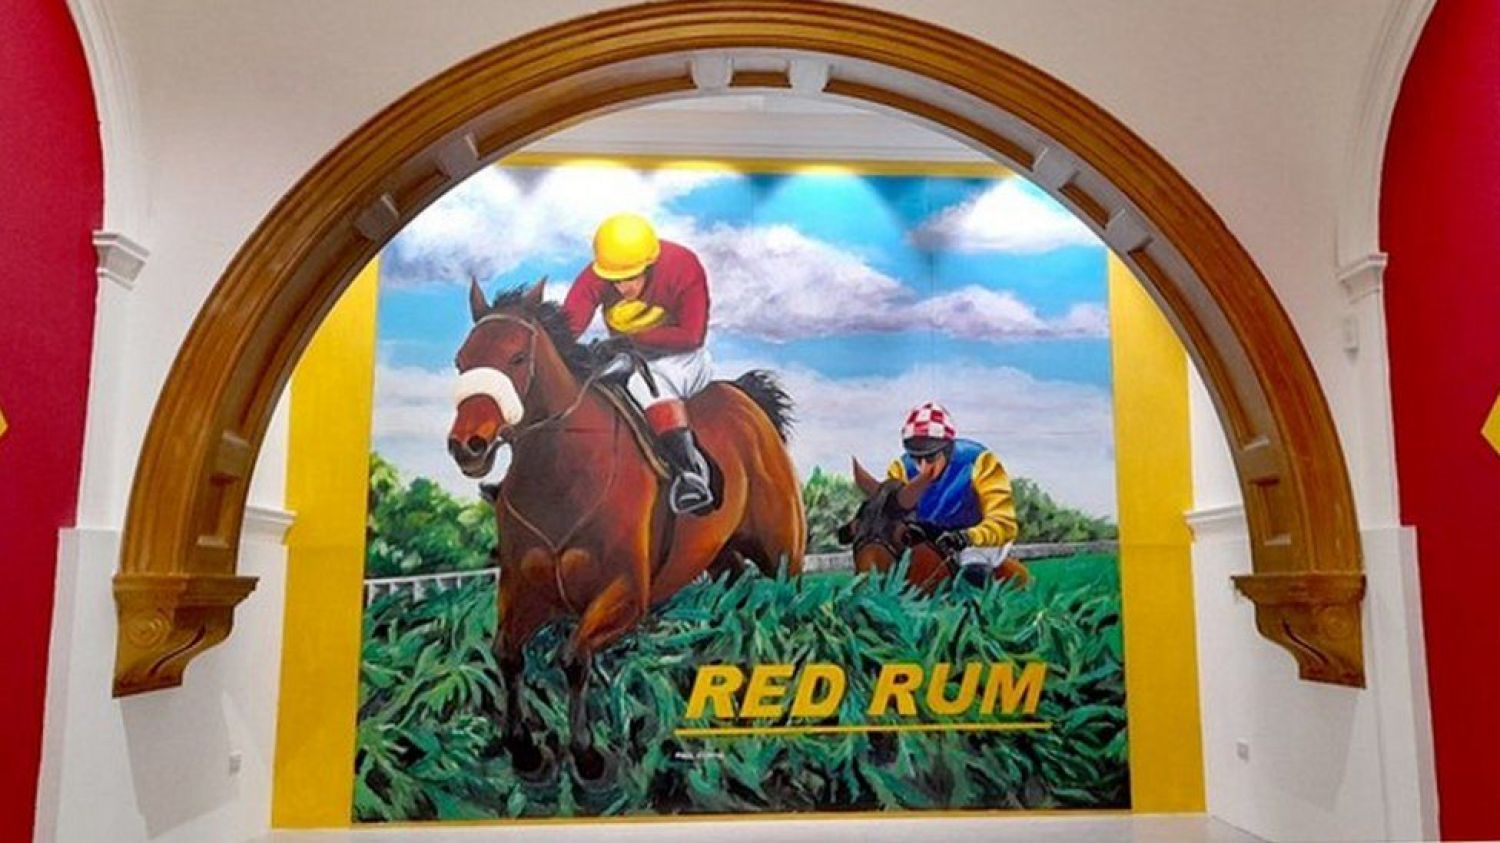 Red Rum Exhibition Open Now in Southport till October 2021